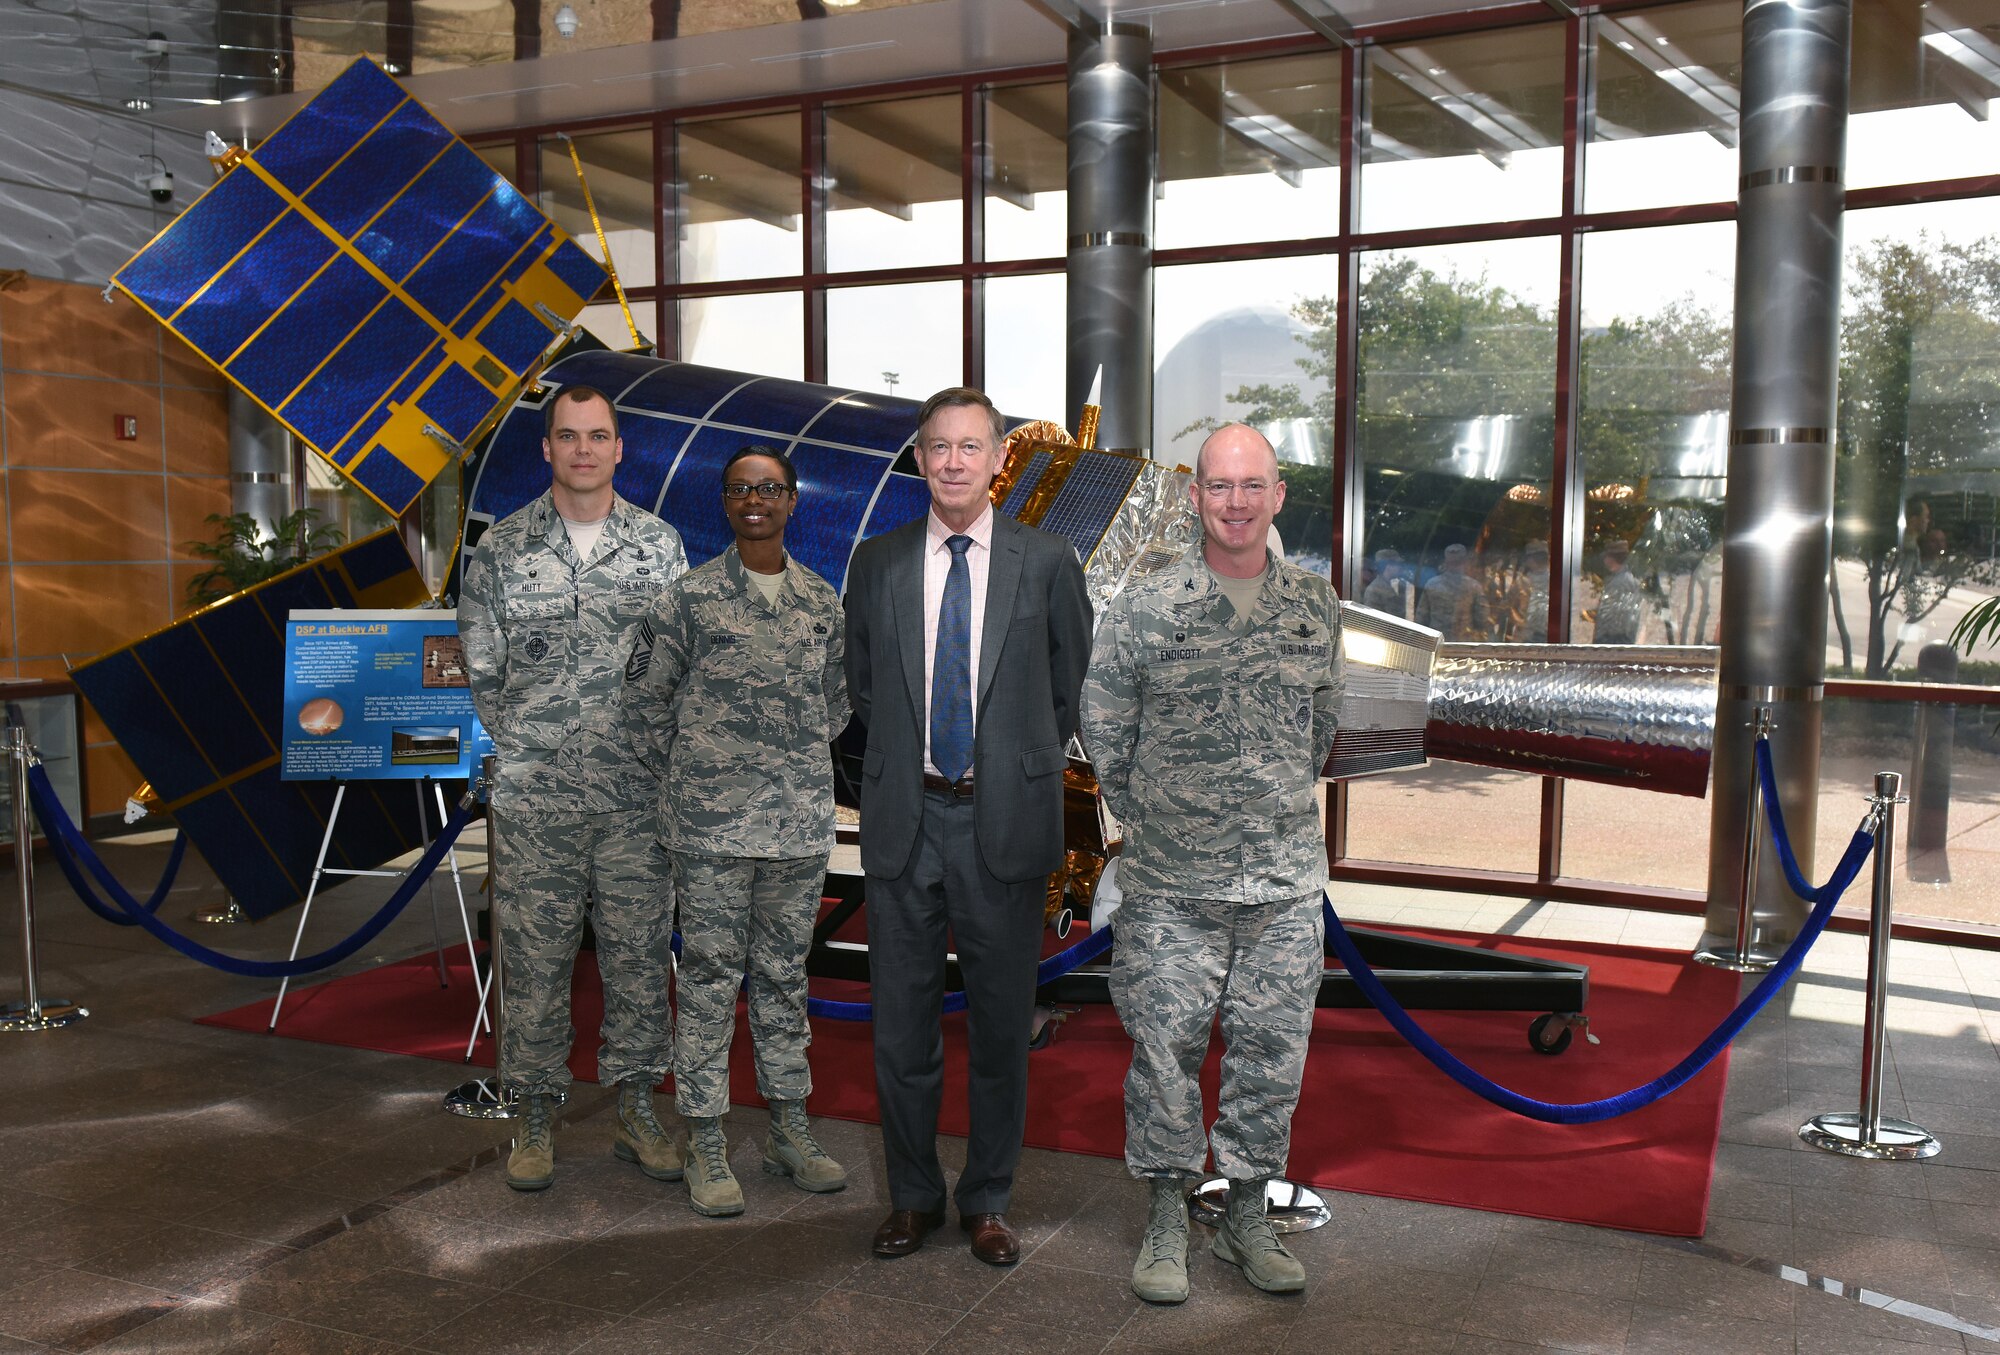 From left to right, Col. Robert Hutt, 460th Operations Group commander, Chief Master Sgt. Tamar Dennis, 460th Space Wing incoming command chief, Gov. John Hickenlooper of Colorado, and Col. Troy L. Endicott, the 460th Space Wing commander, stand for a group photo in front of the Space Based Infrared System in the Mission Control Station lobby at Buckley Air Force Base, Colorado, July 17, 2018.